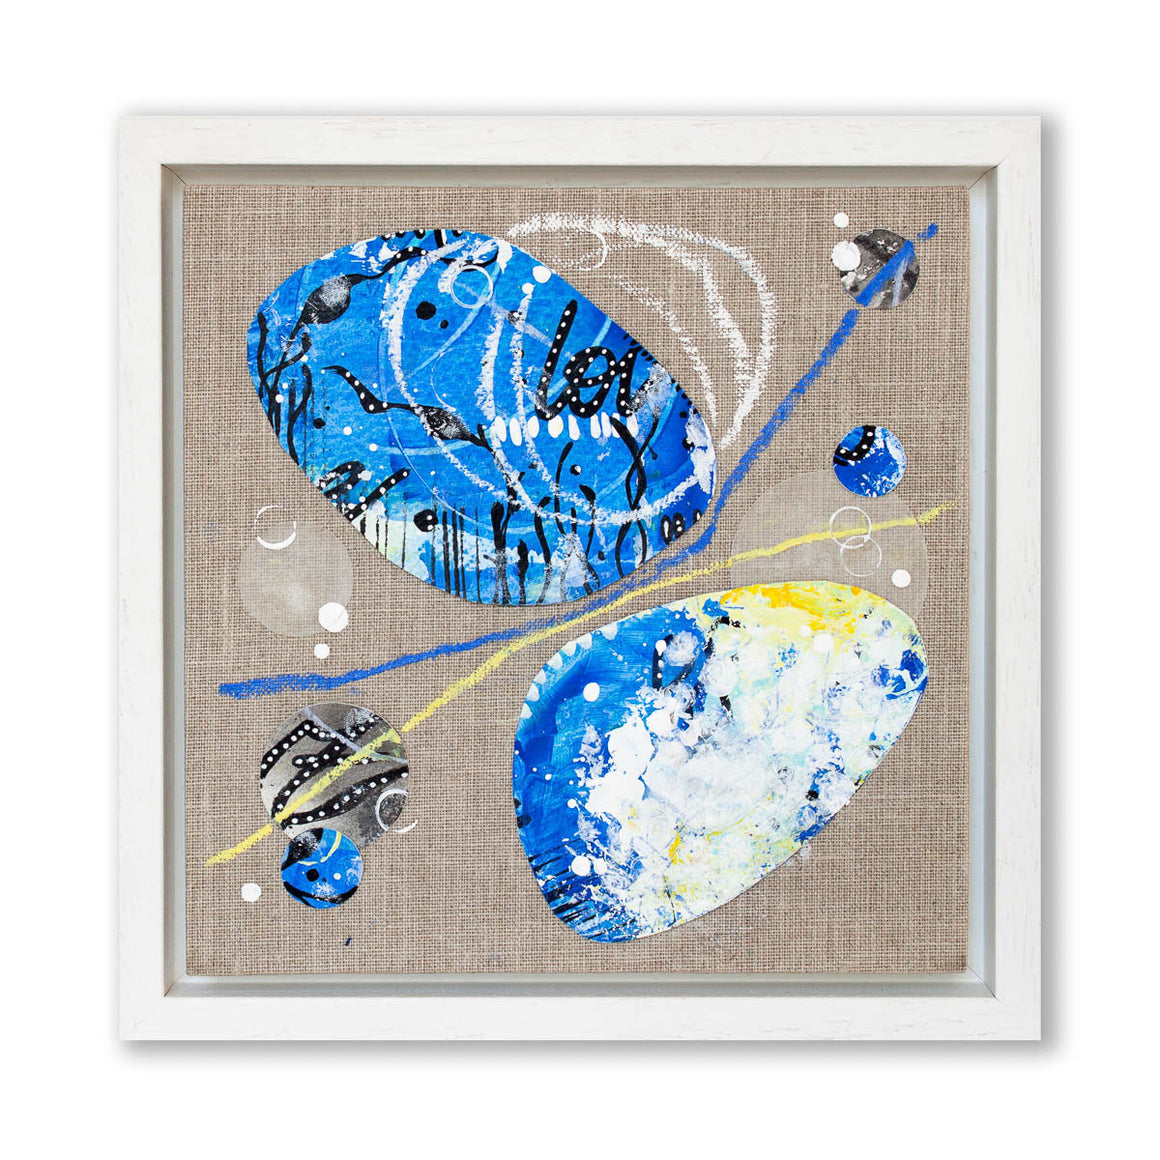 Caught in the slipstream |  Framed Pebble Painting on 20cm sq Canvas